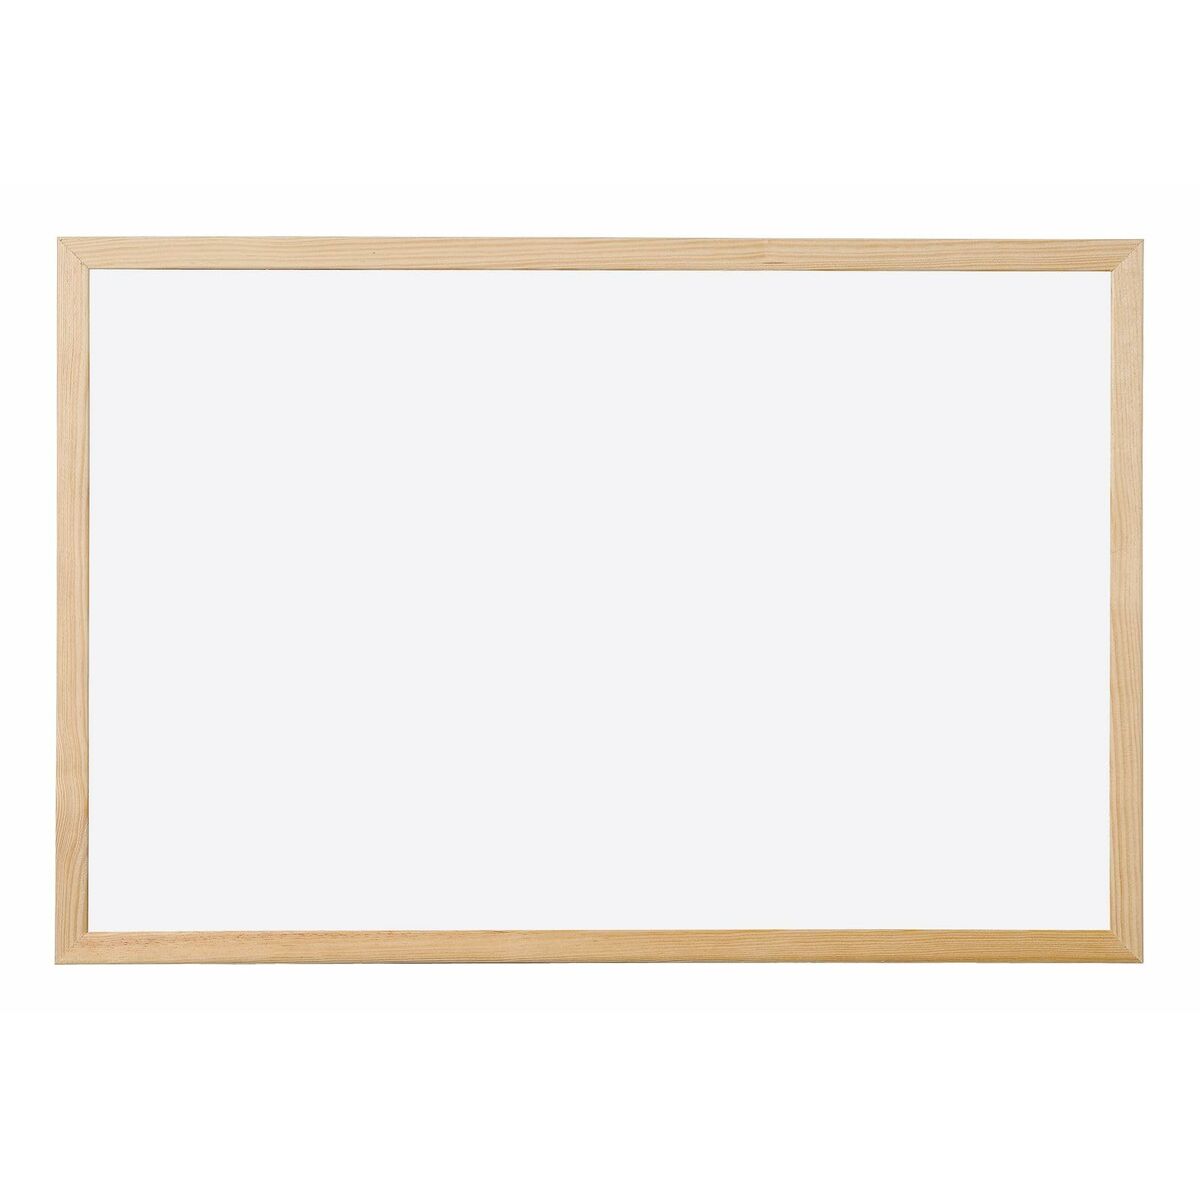 Magnetic board Q-Connect KF03570 White Wood 40 x 60 cm